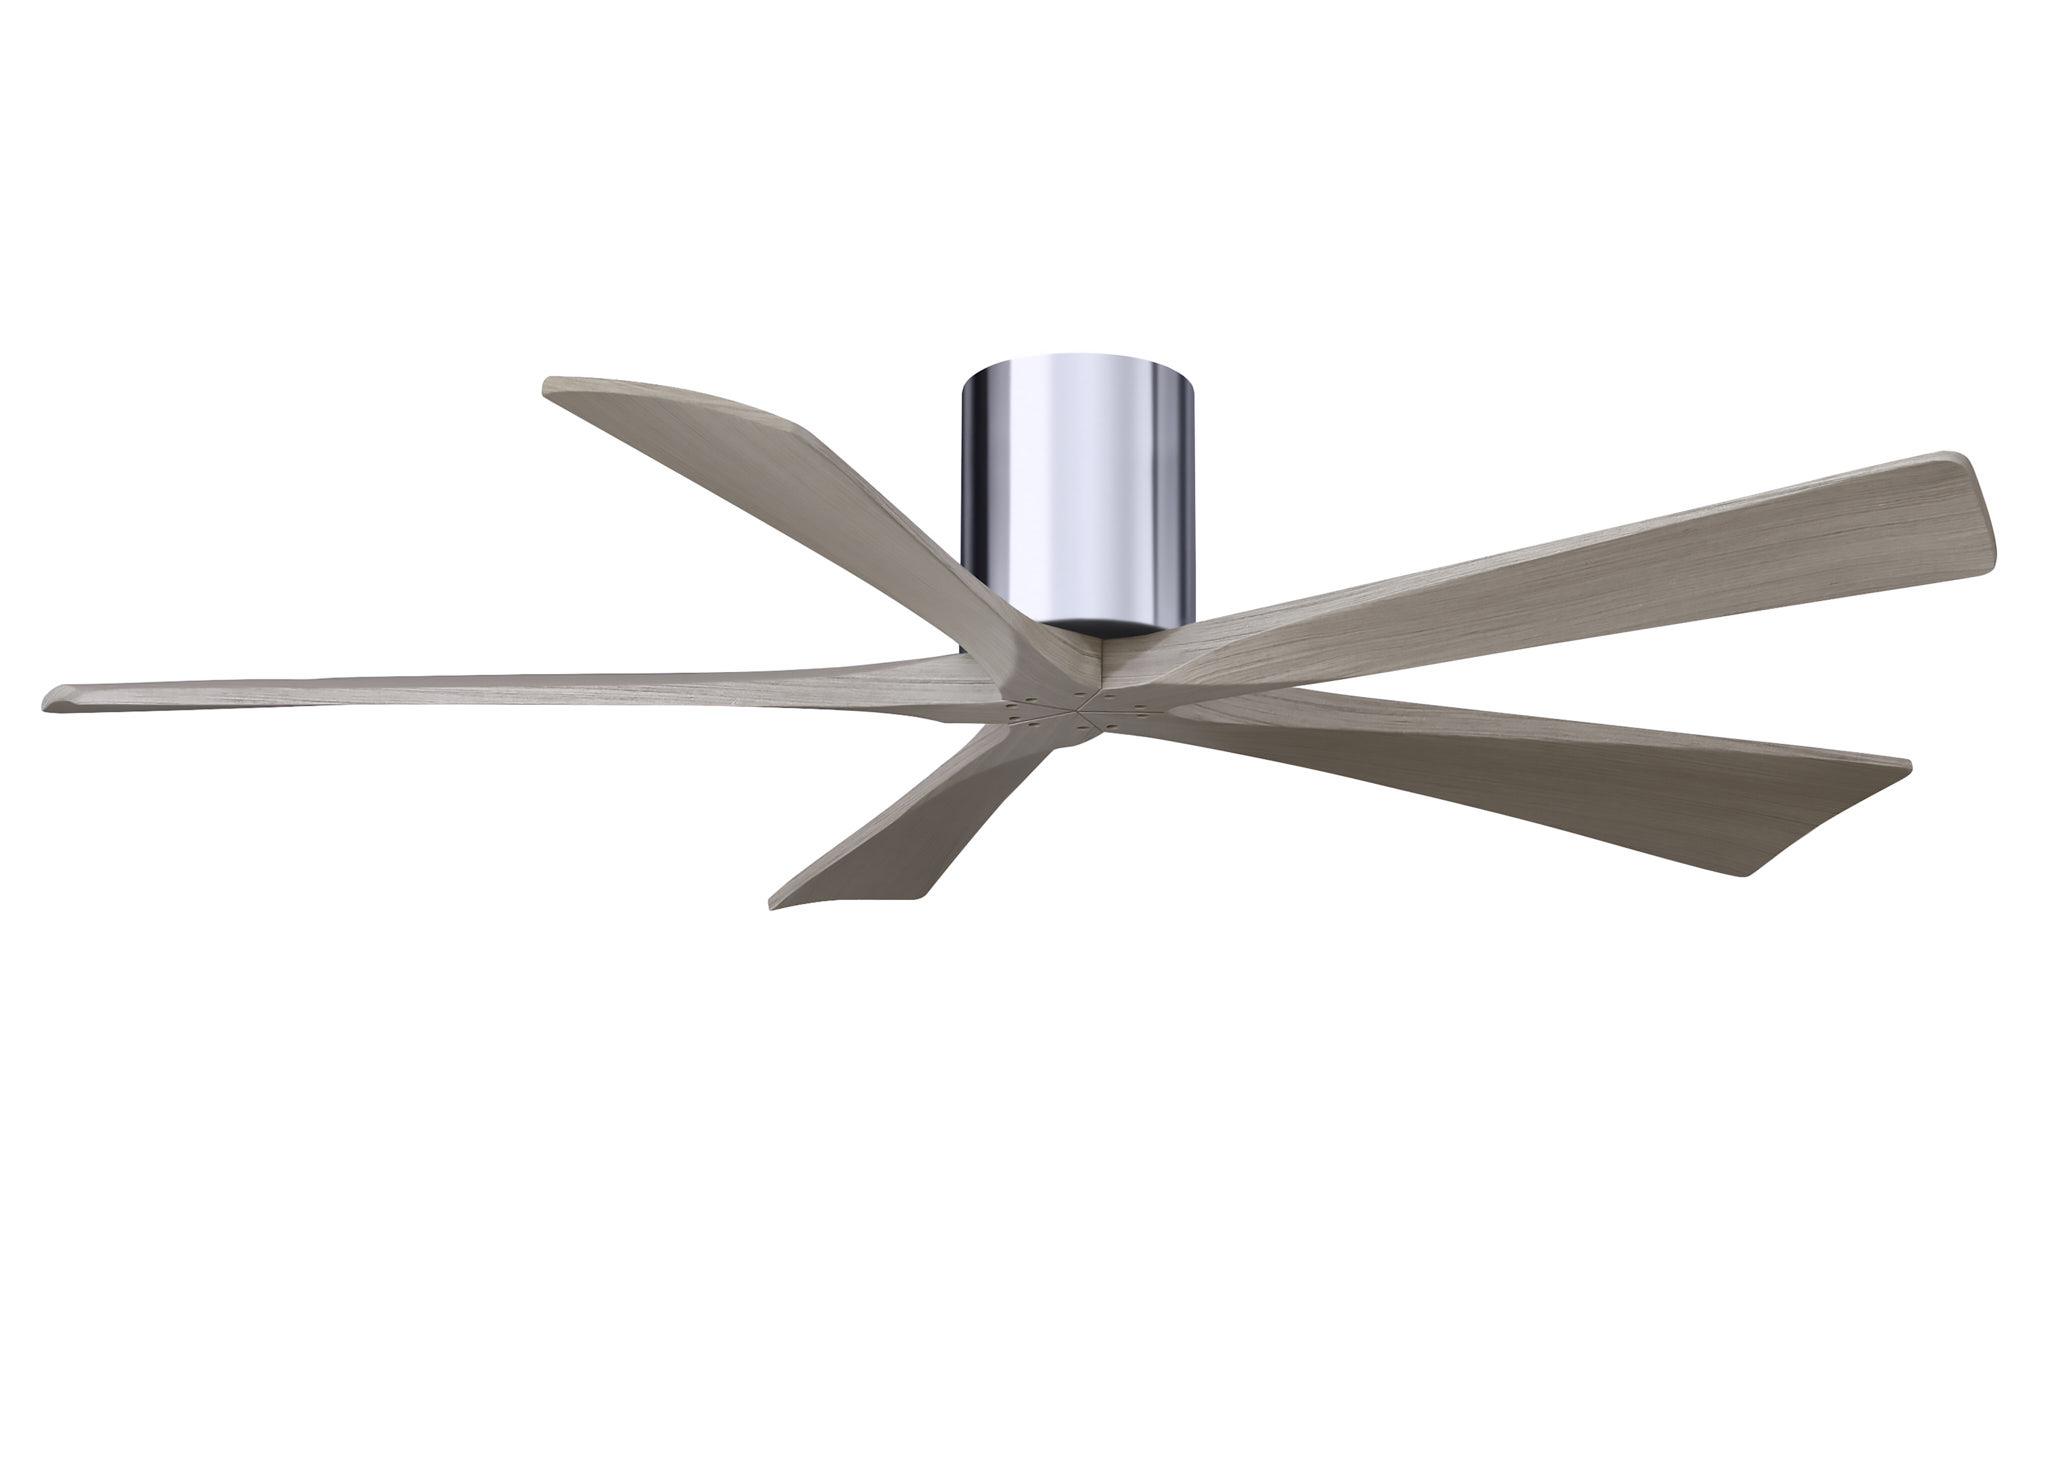 Irene-5H 6-speed ceiling fan in polished chrome finish with 60